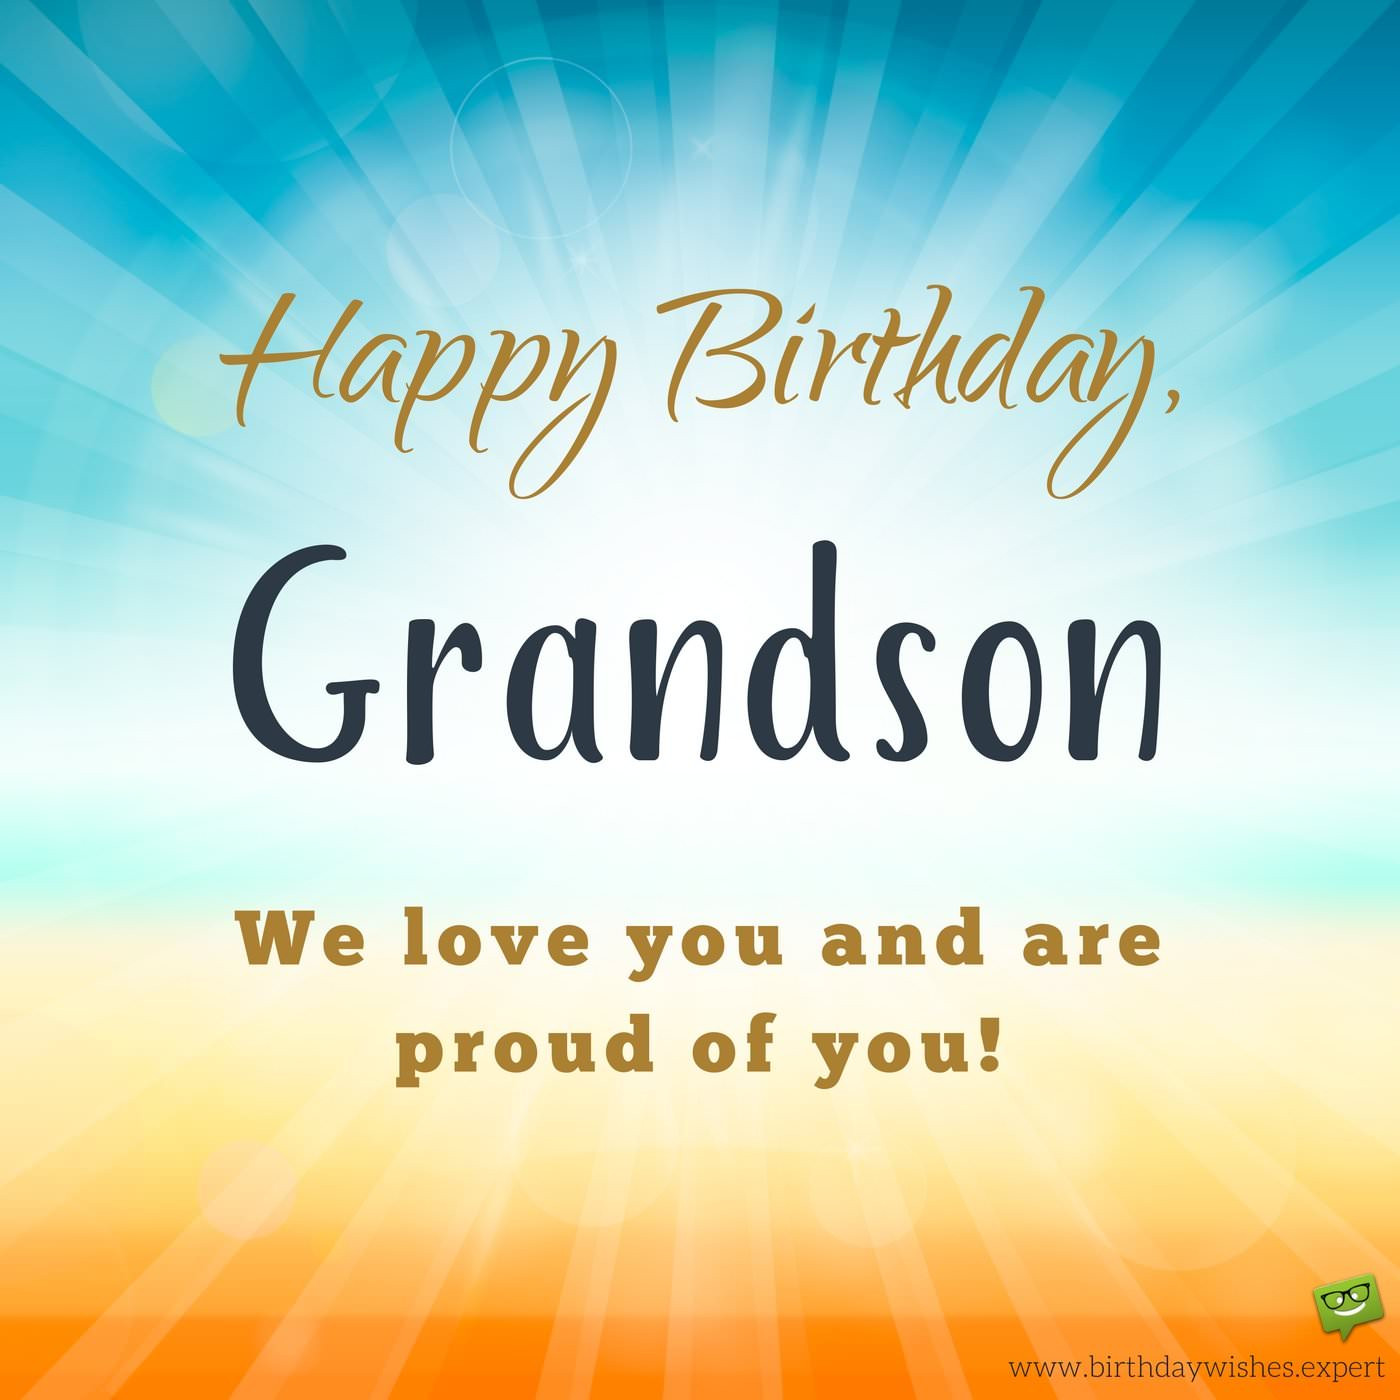 Birthday Wishes Grandson
 From your Grandma & Grandpa Birthday Wishes for my Grandson